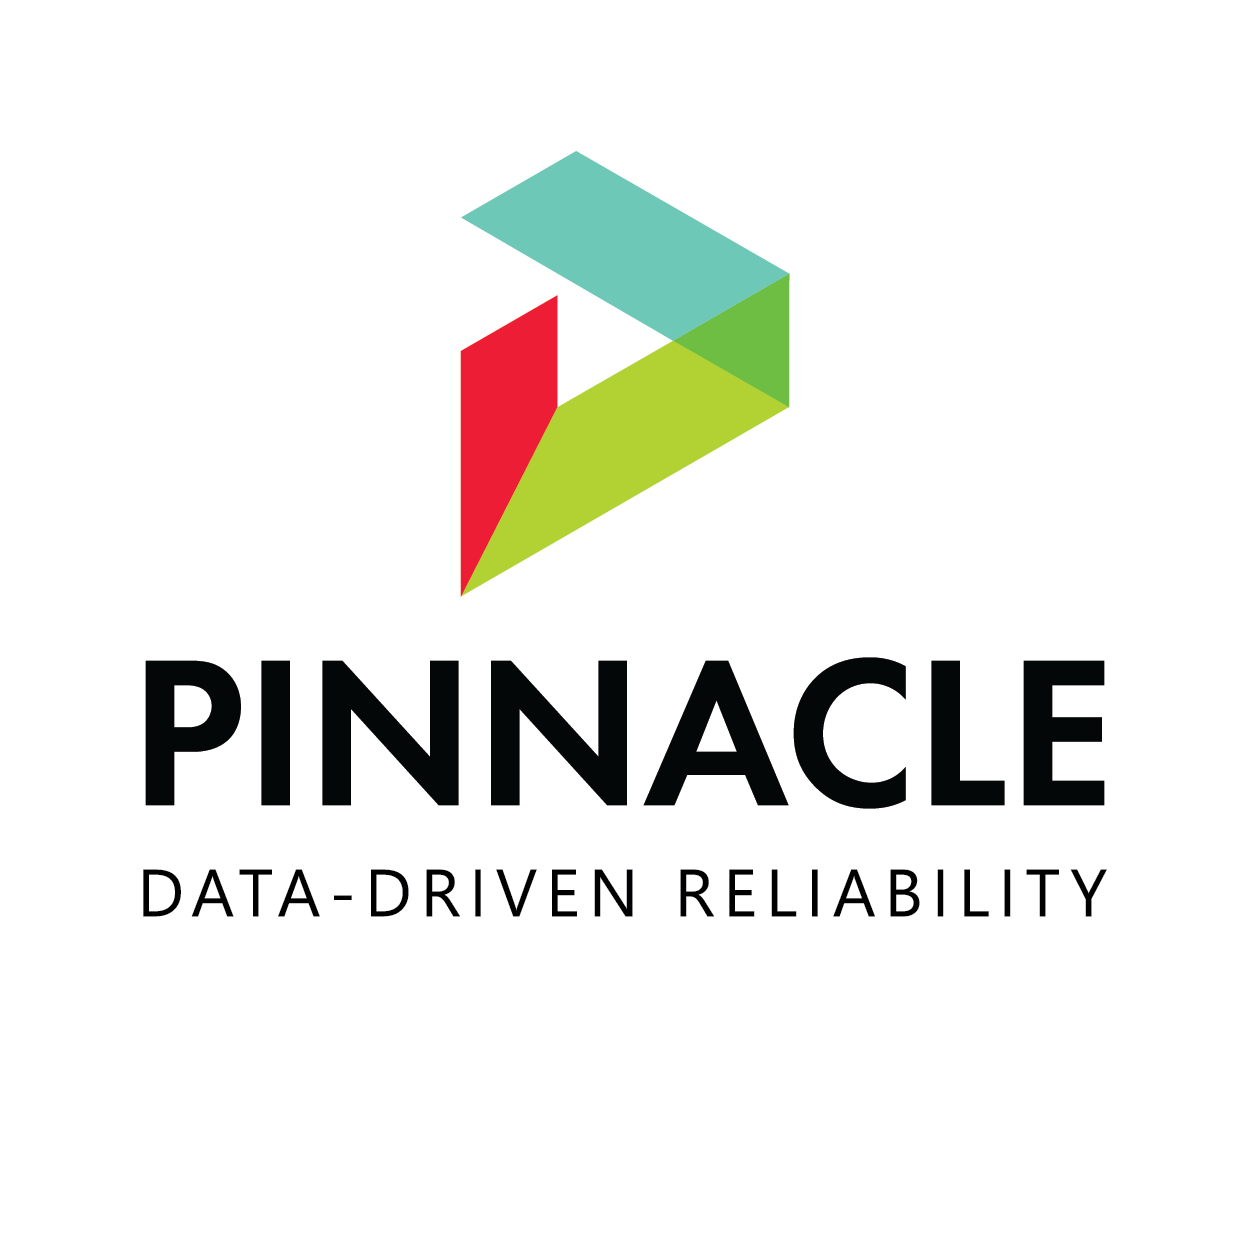 Let data drive your reliability.